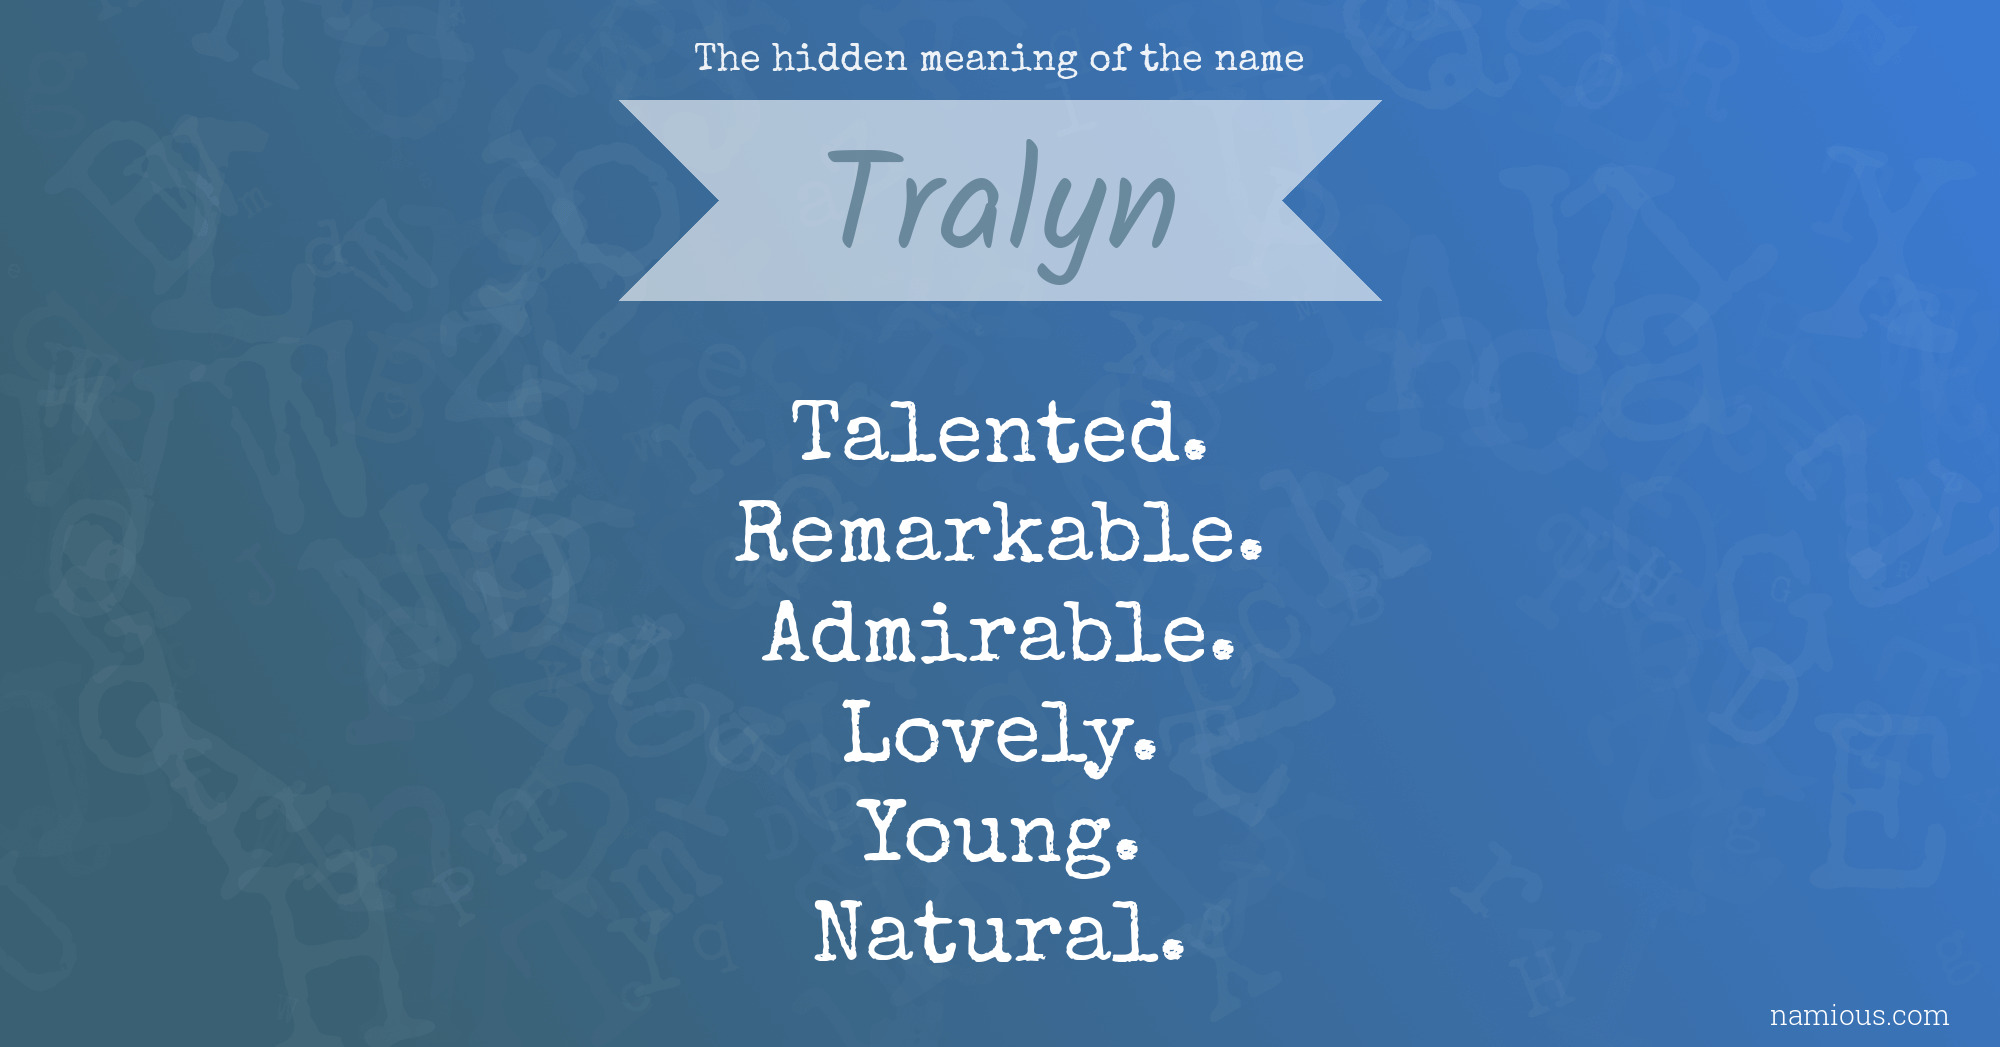 The hidden meaning of the name Tralyn